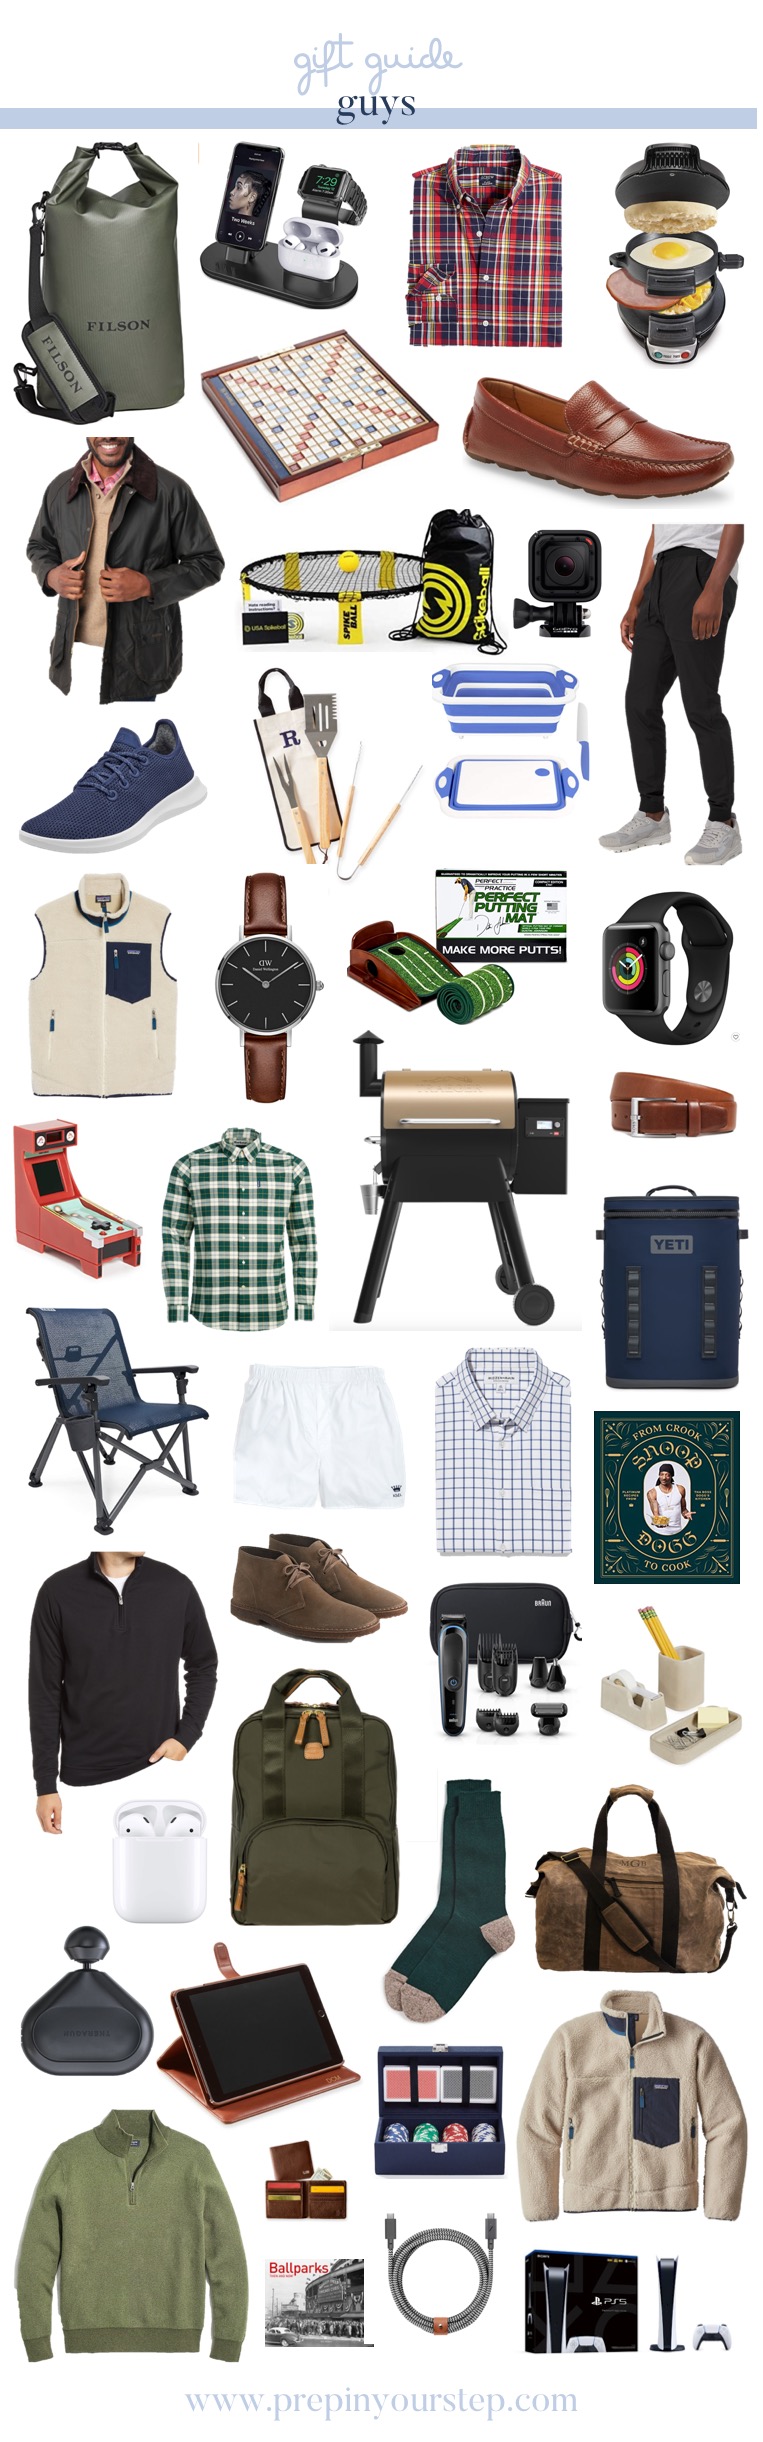 Prep In Your Step: Gift Guide: Boyfriend, Husband, Brother, Son